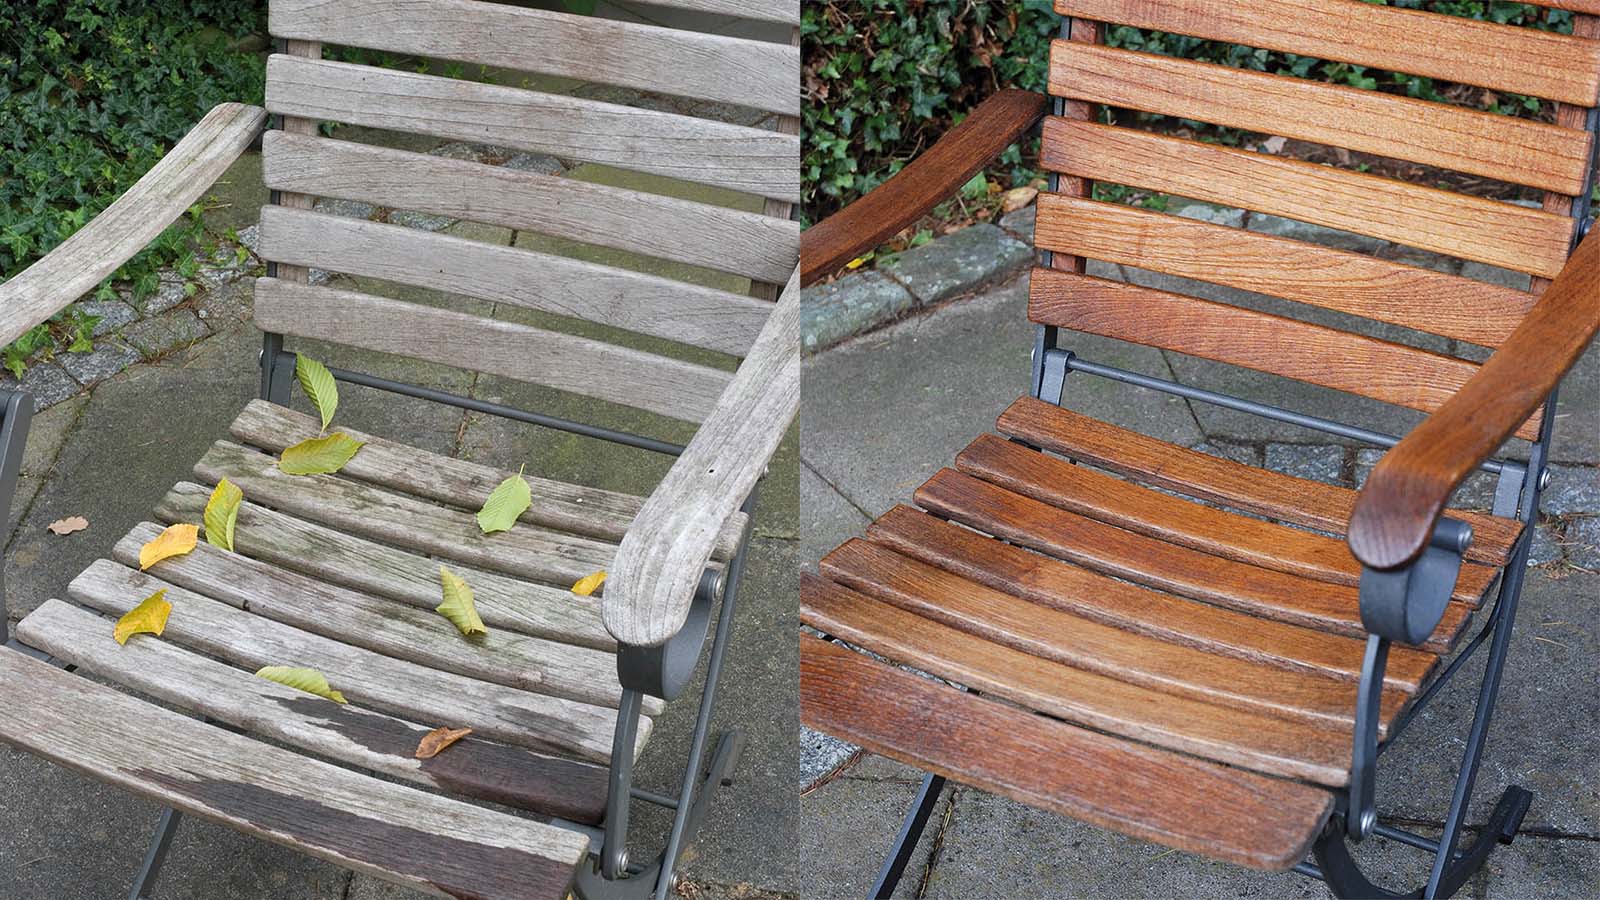 Renovate Wooden Garden Furniture With, What Oil To Use On Outdoor Wooden Furniture